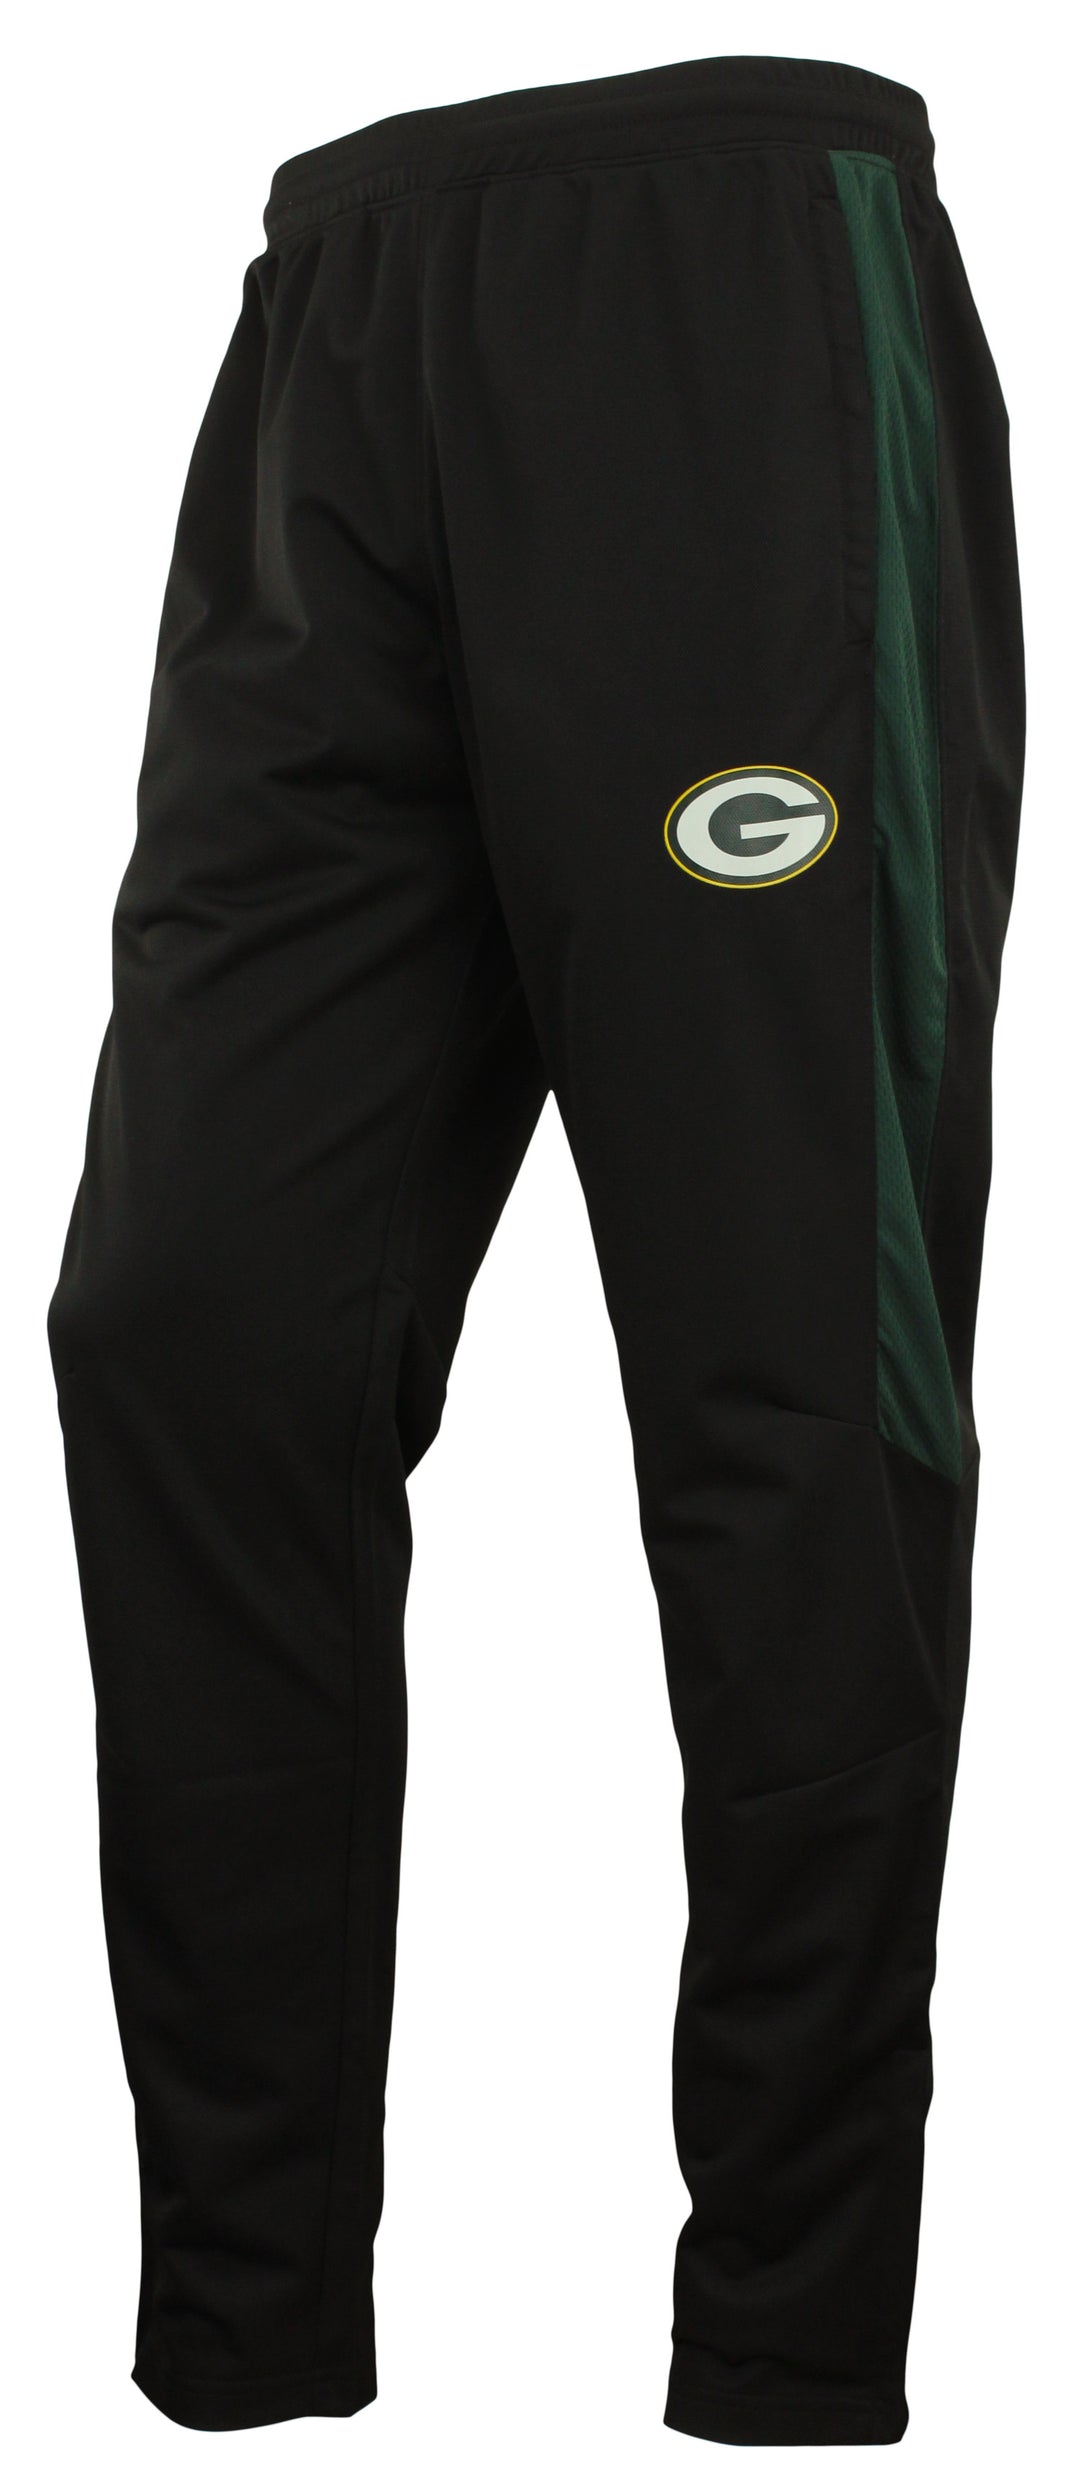 Zubaz NFL Football Men's Green Bay Packers Athletic Track Pant